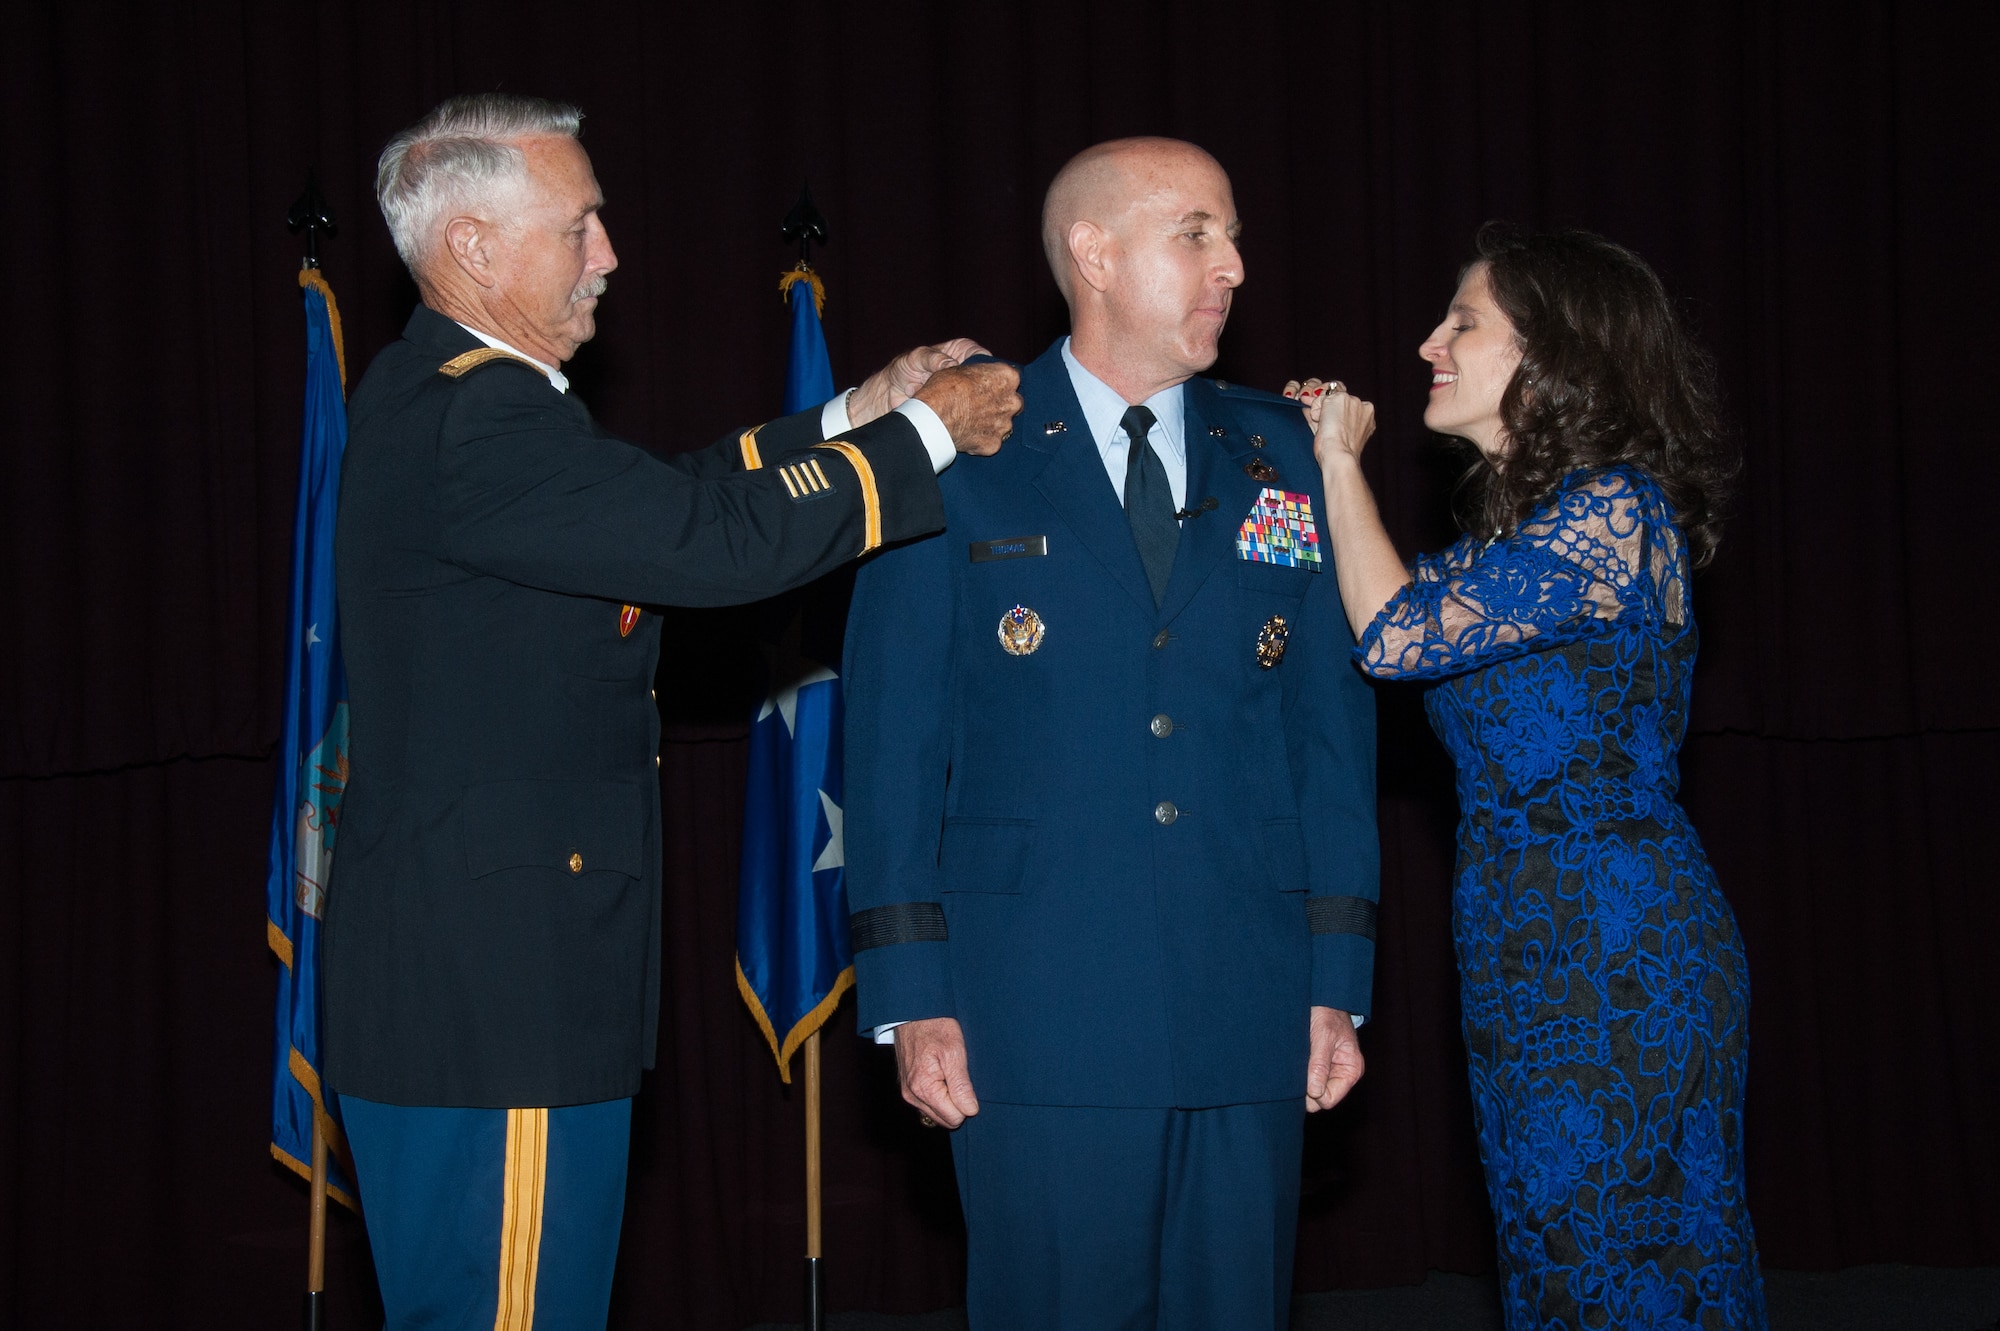 Brig. Gen. Edward W. Thomas Jr. is pinned by his father, Retired Army Maj. Edward W. Thomas, Sr. and Gen. Thomas’ wife, Dinah during his promotion ceremony at the Non Commissioned Officer Academy, Maxwell Air Force Base, May 12, 2016.  Thomas is only one of two career Public Affairs flag officers. (US Air Force photo by Melanie Rodgers Cox) 